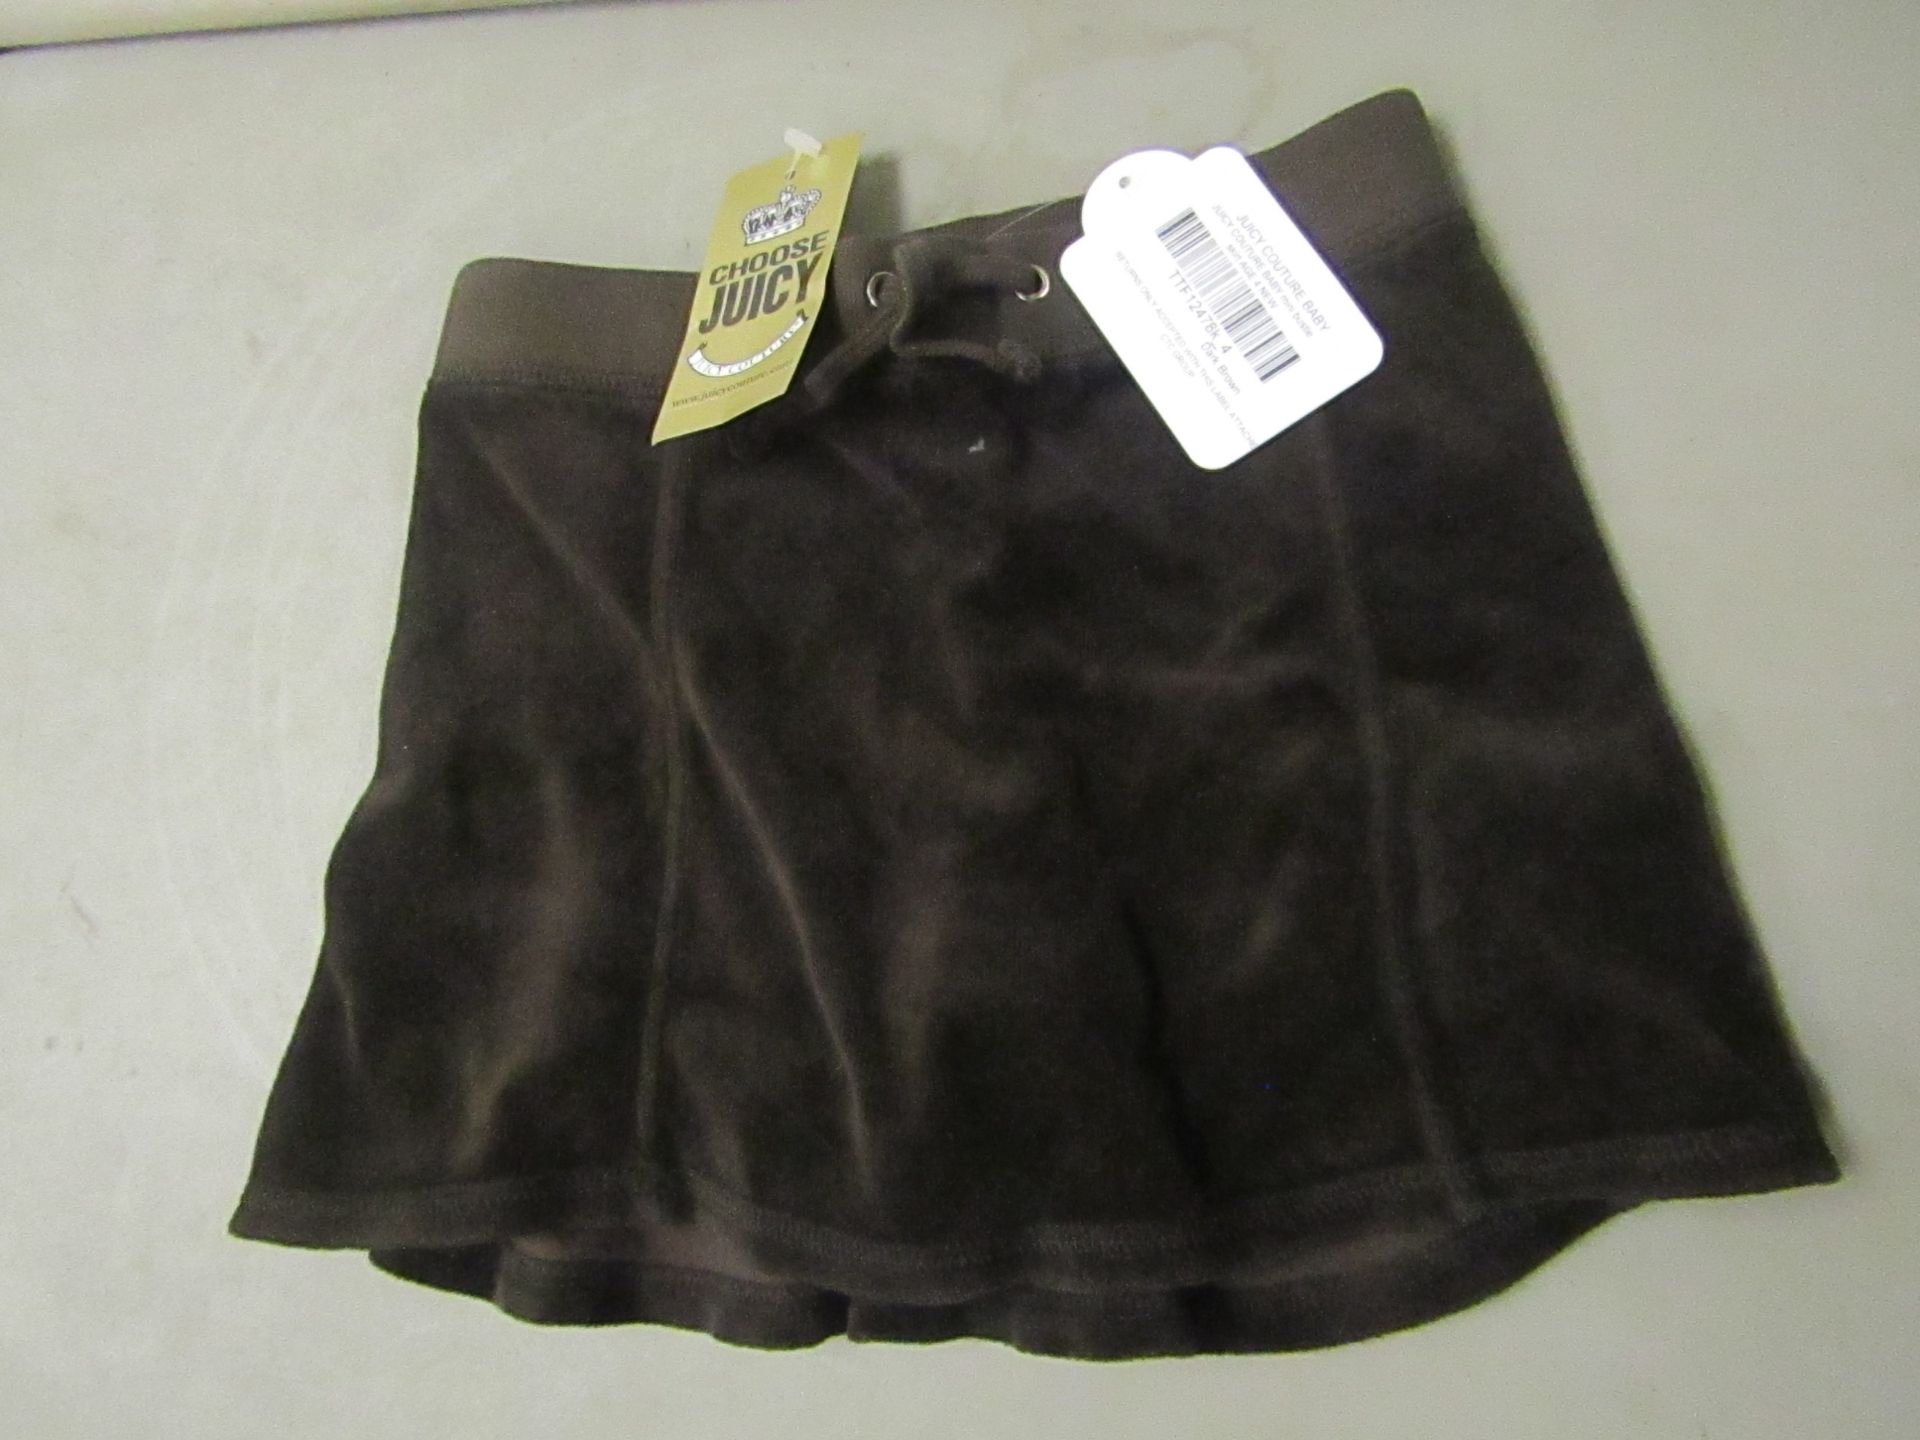 Juicy Couture Girls Skirt Aged 4yrs New